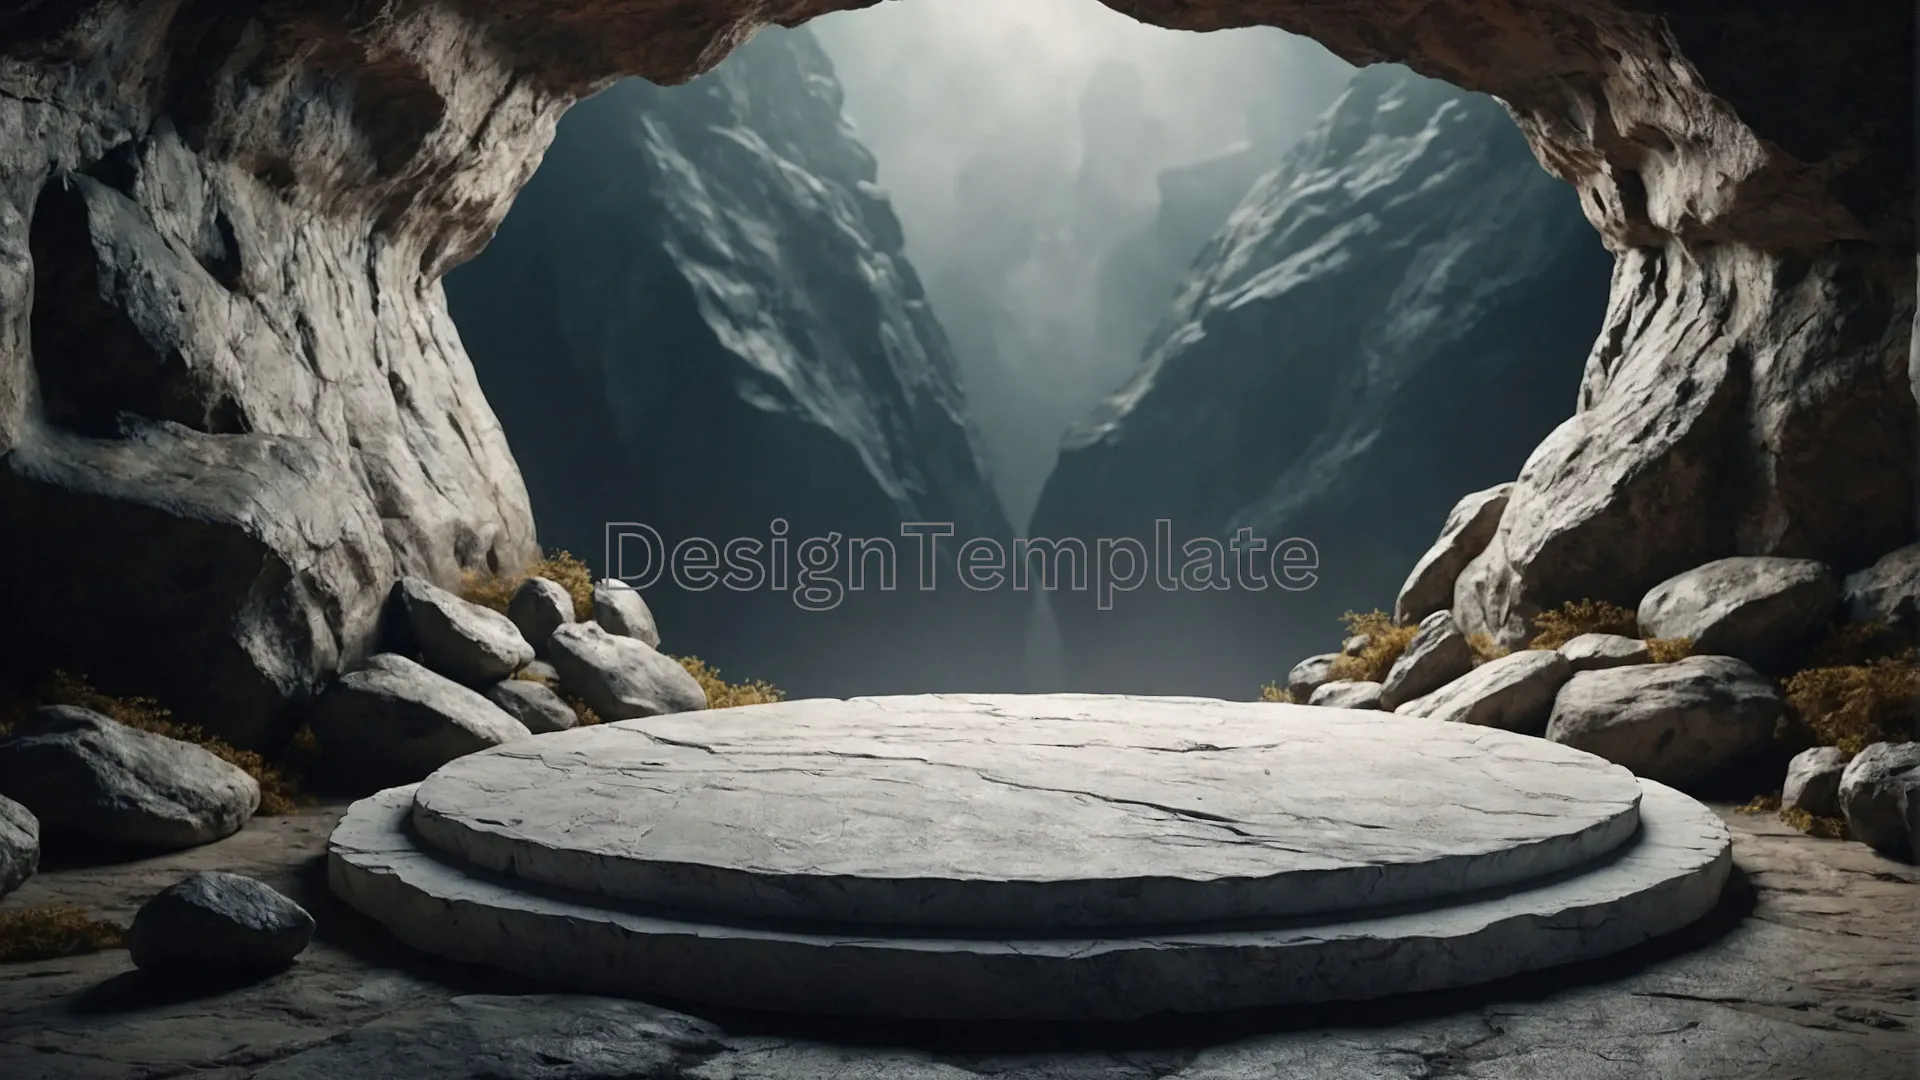 High-Quality PNG Image of a Mountain Cave Stone Theme Circle Podium image